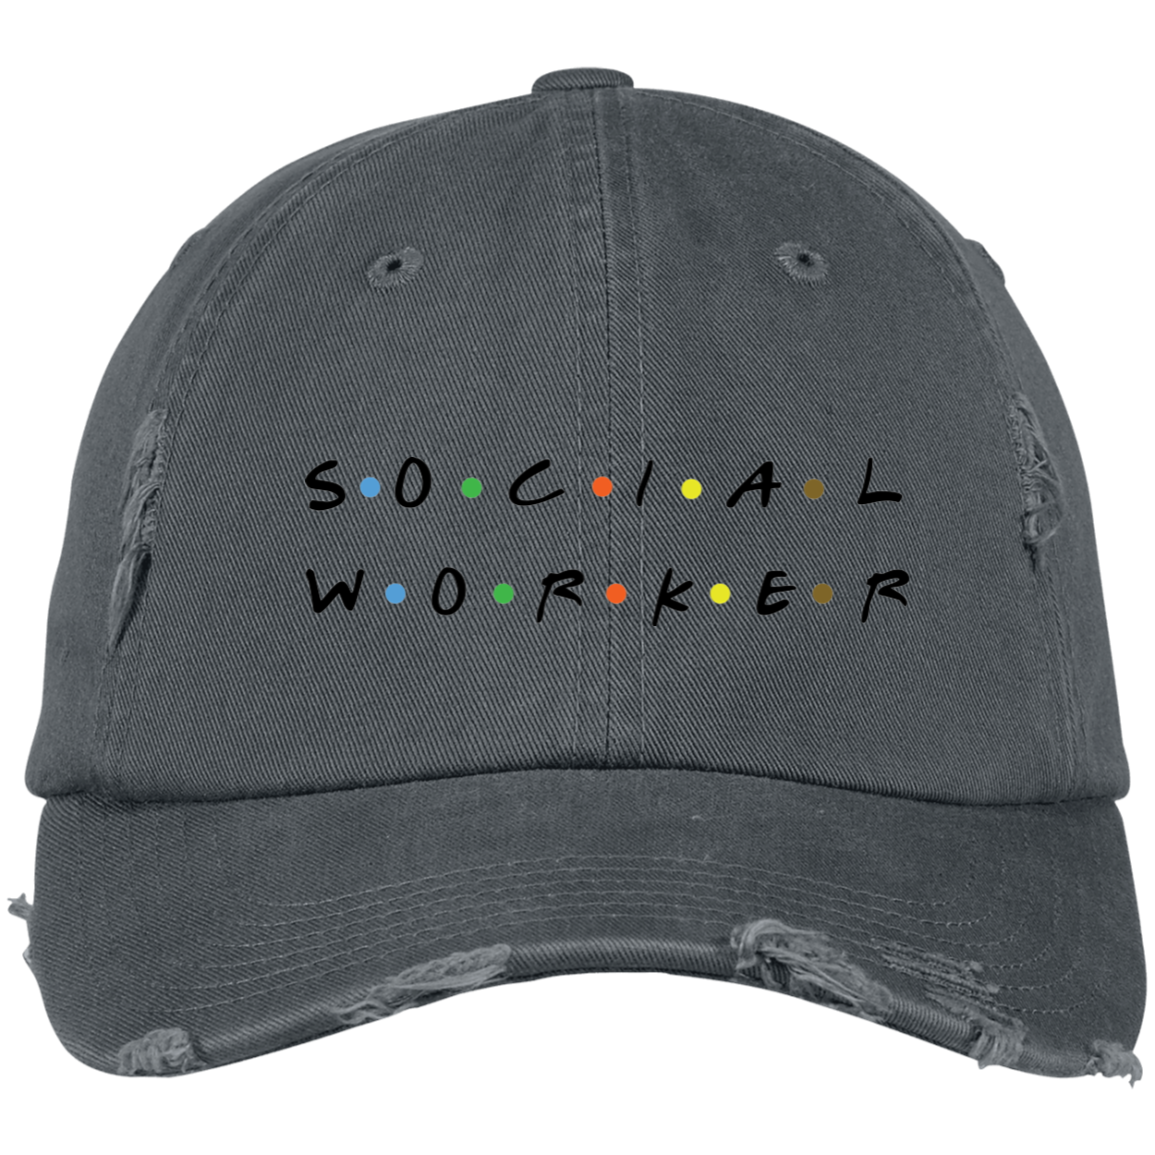 Social Work Embroidered Distressed Dad Cap